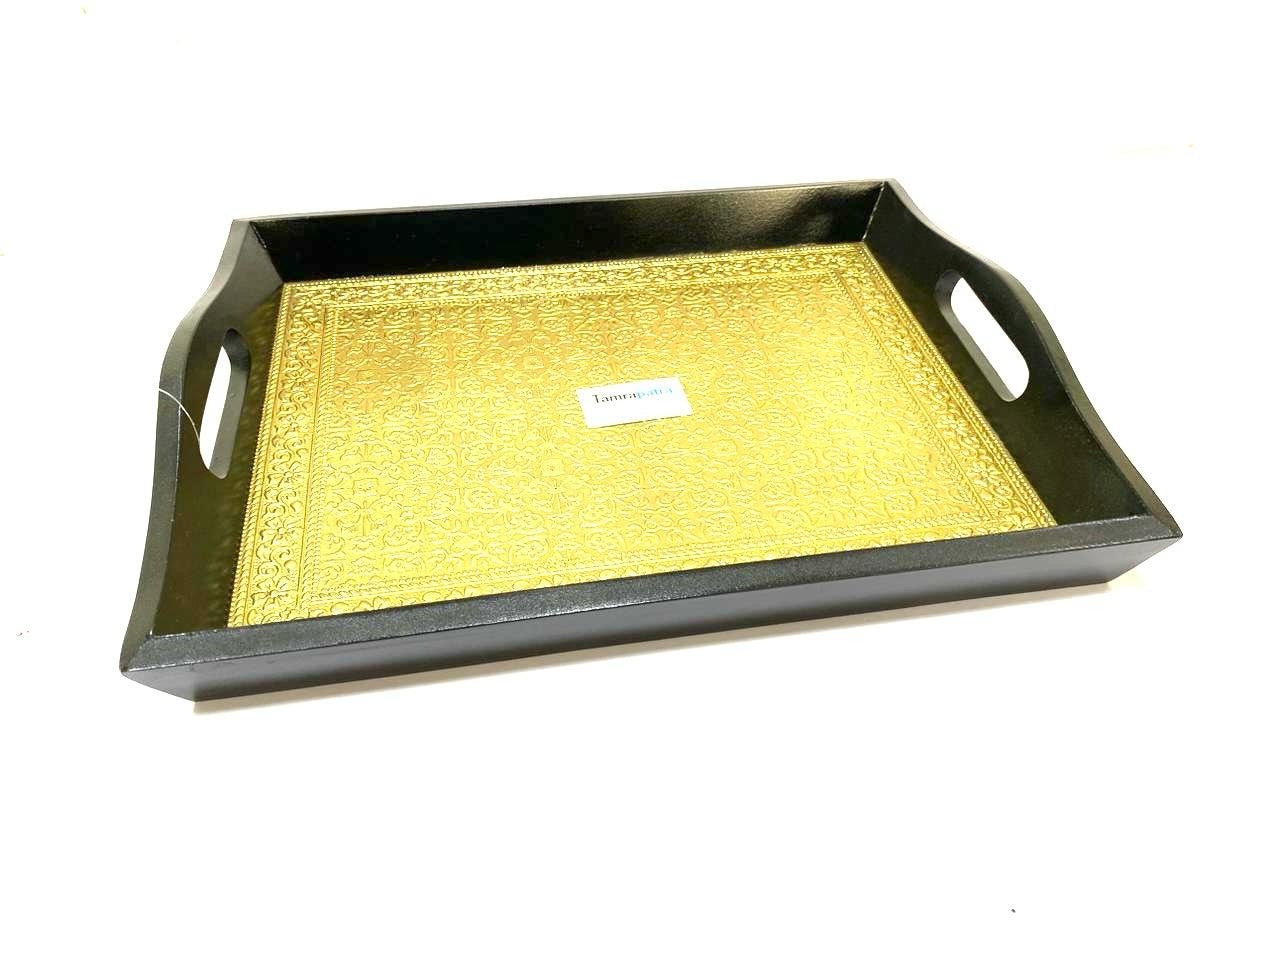 Limited Edition Brass Foil Fitted Premium Wooden Tray Home Décor By Tamrapatra - Tamrapatra